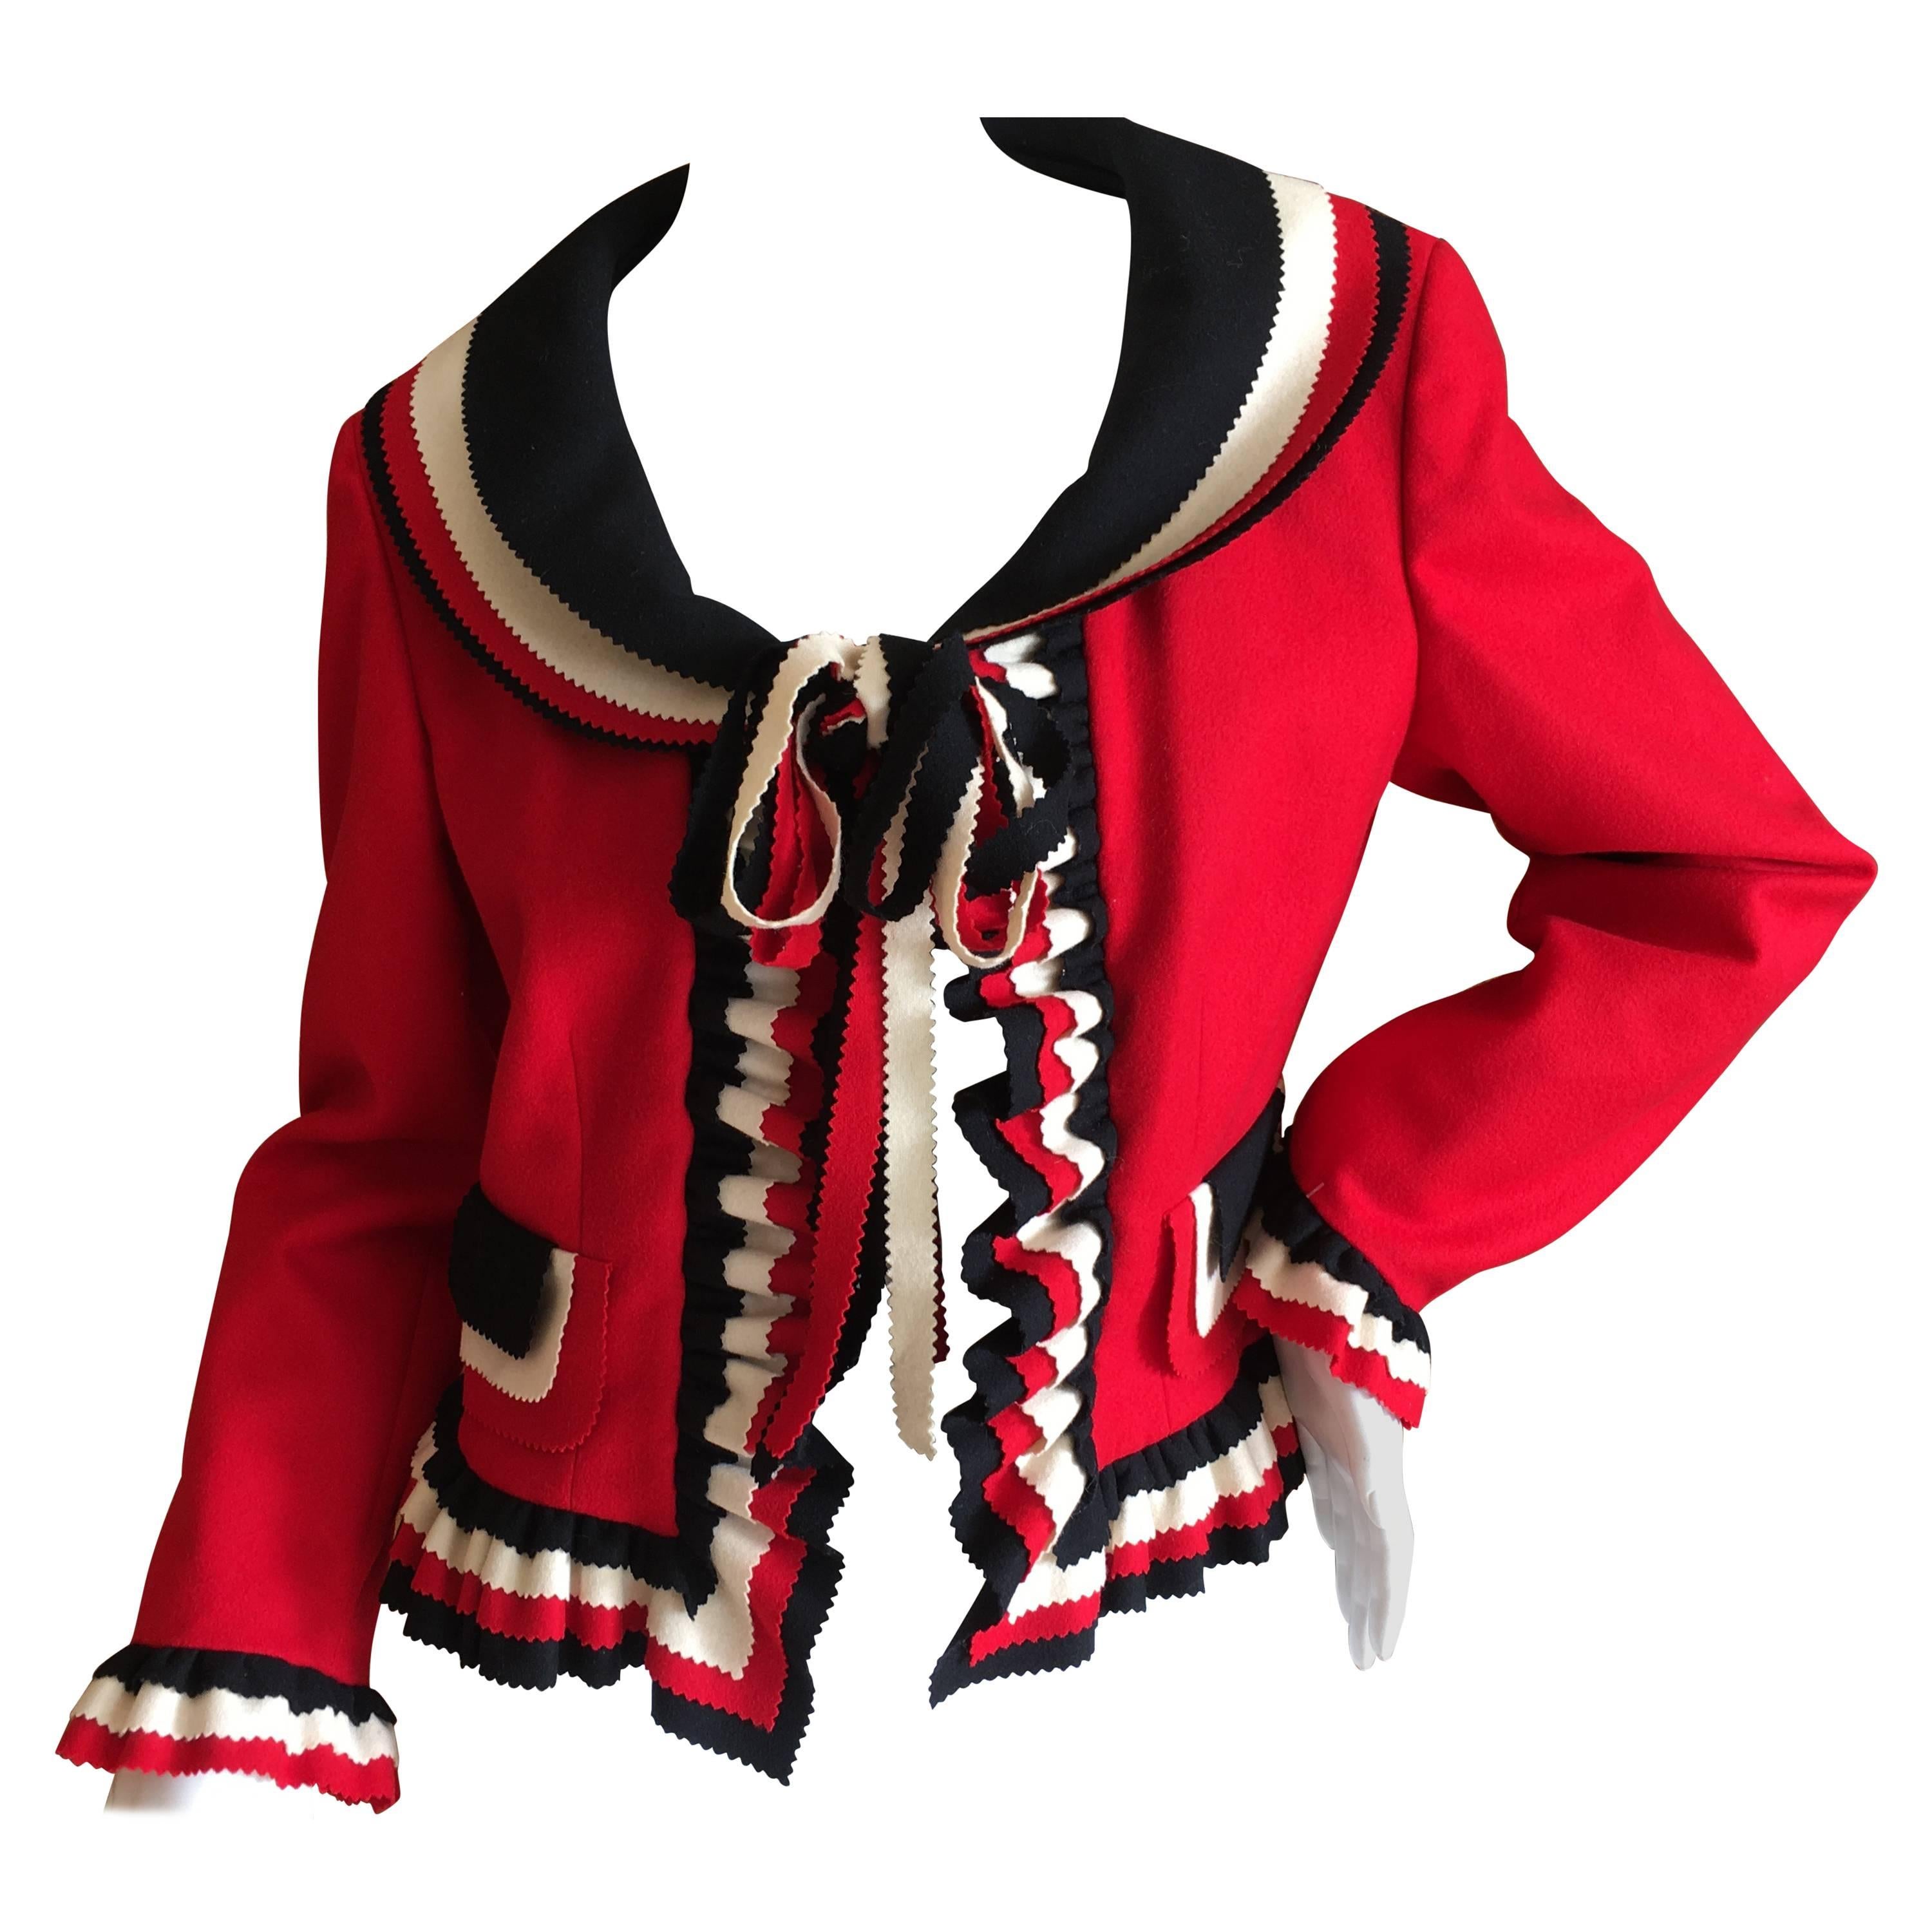 Moschino 1993 Ruffled Red Jacket For Sale